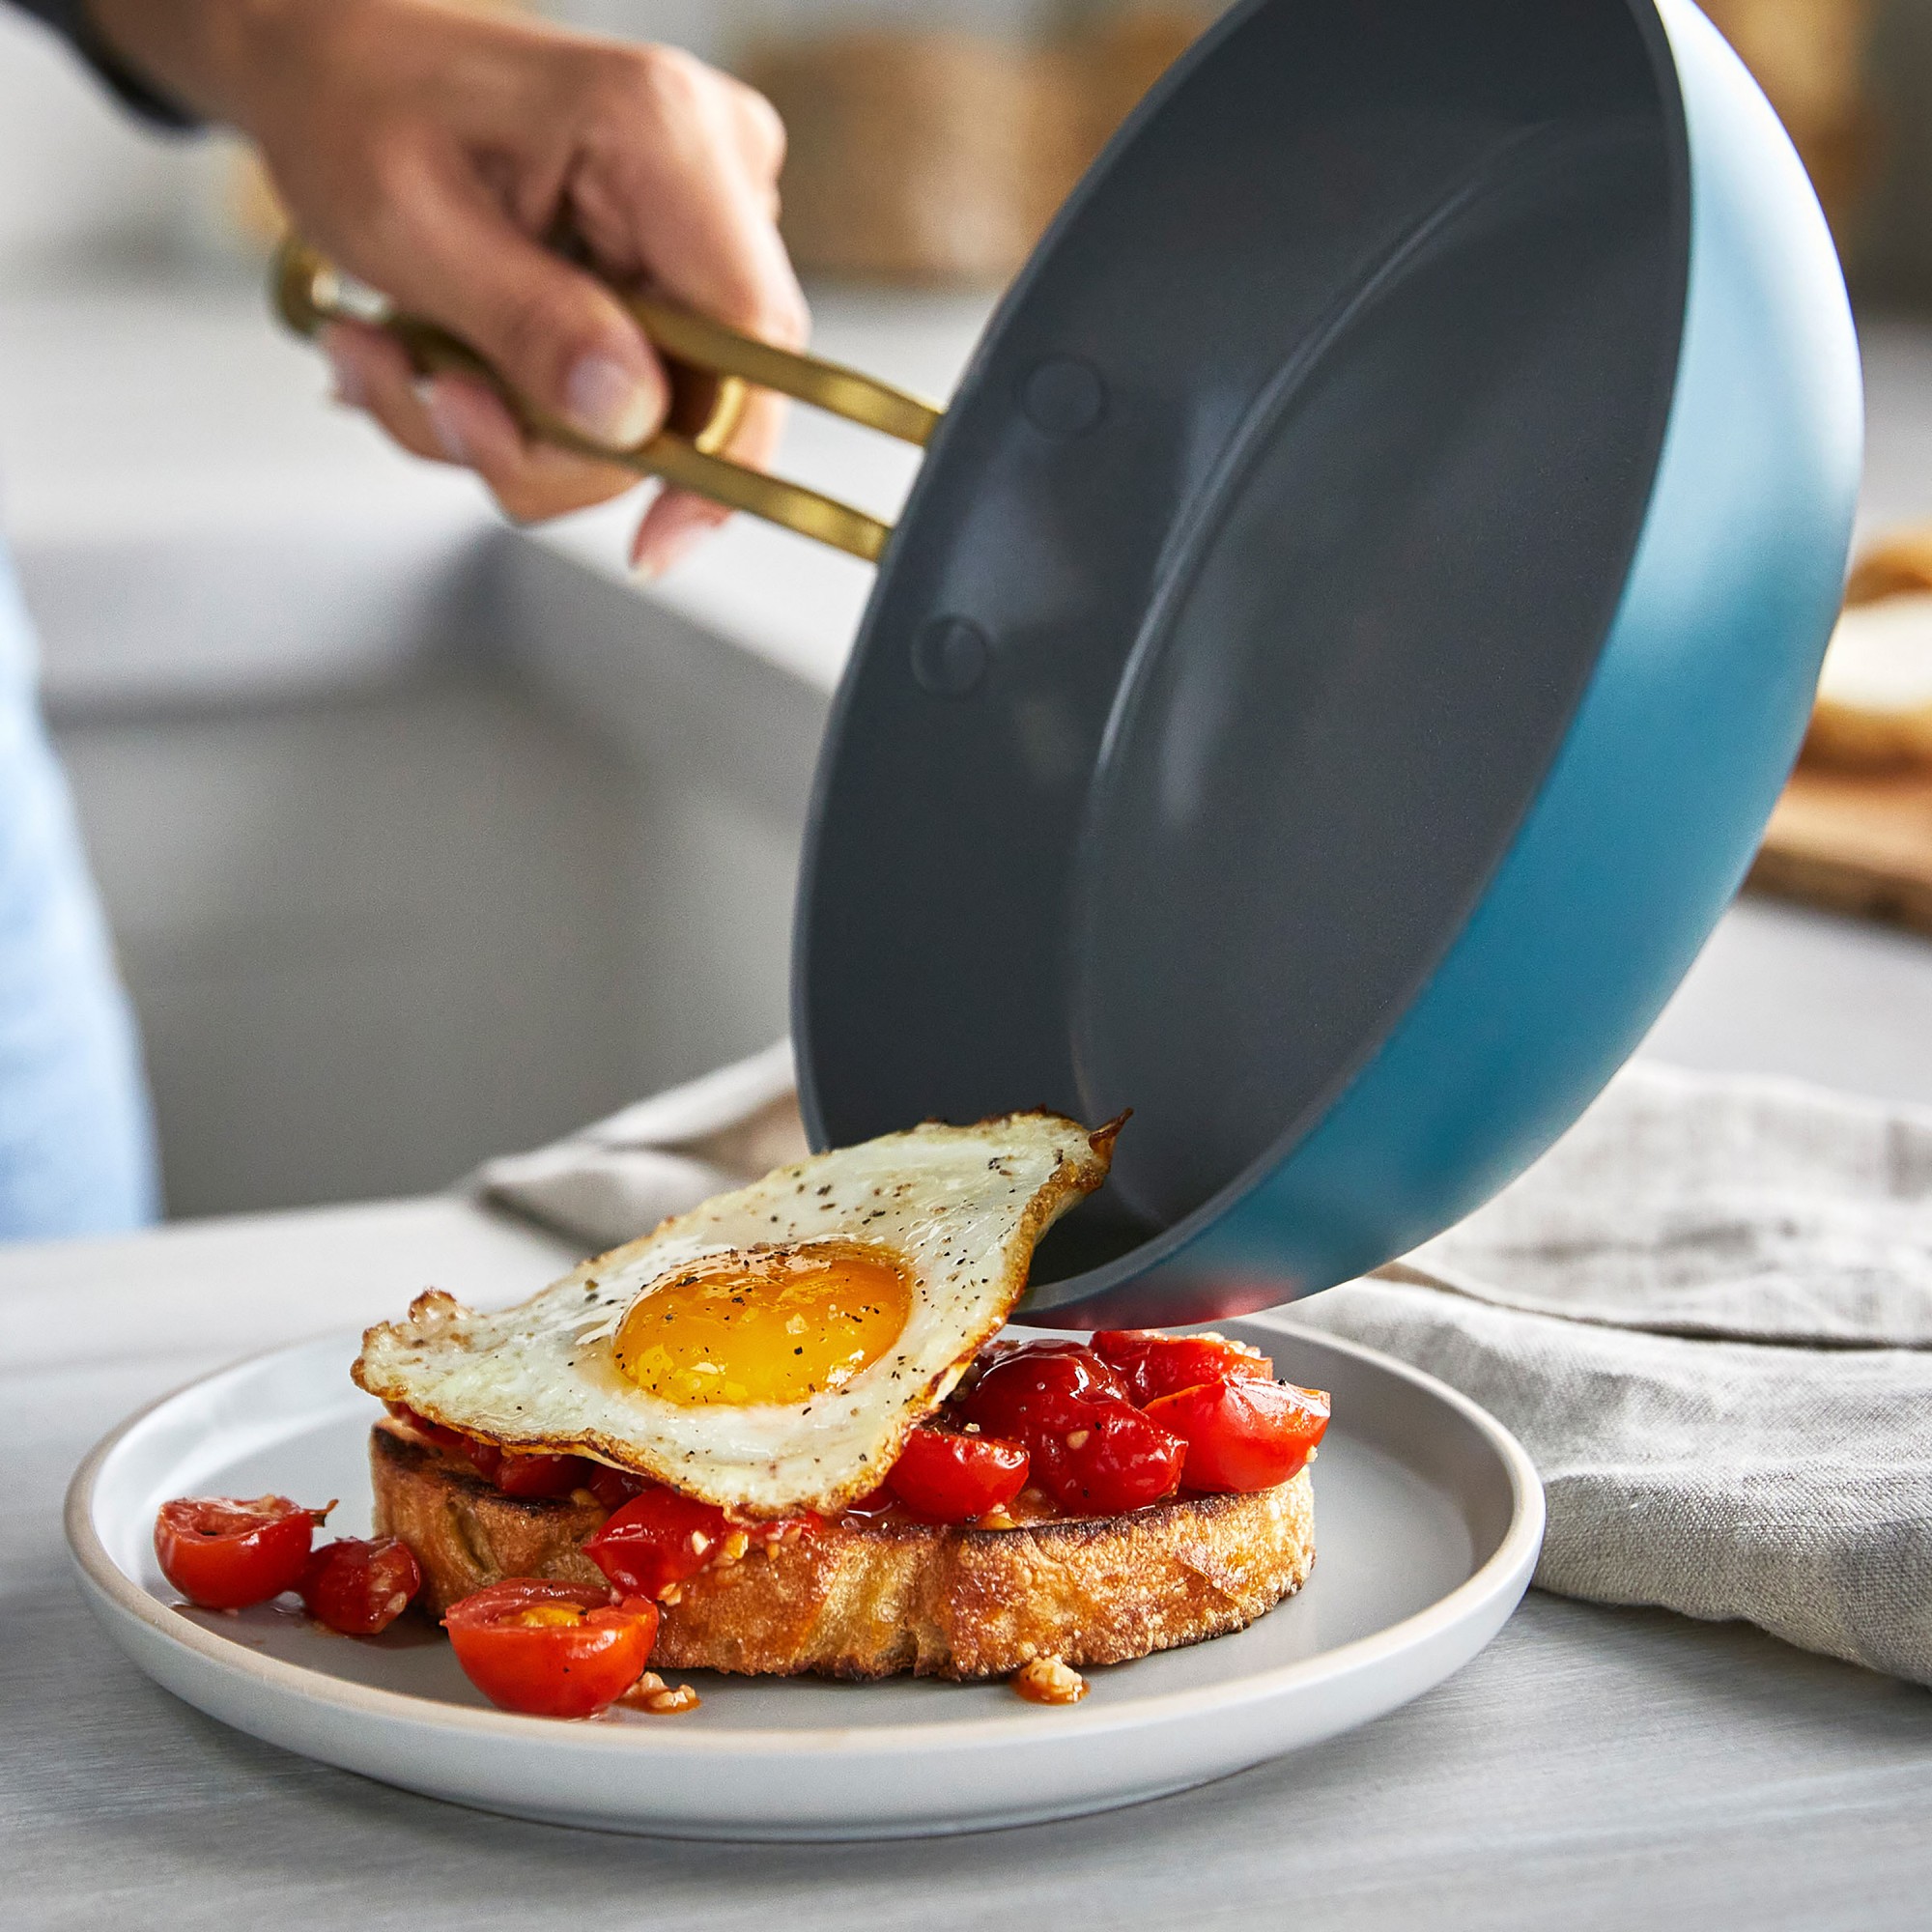 Stanley Tucci Just Released His First-Ever Cookware Line—and I Can't Wait  To Get My Hands on a Set